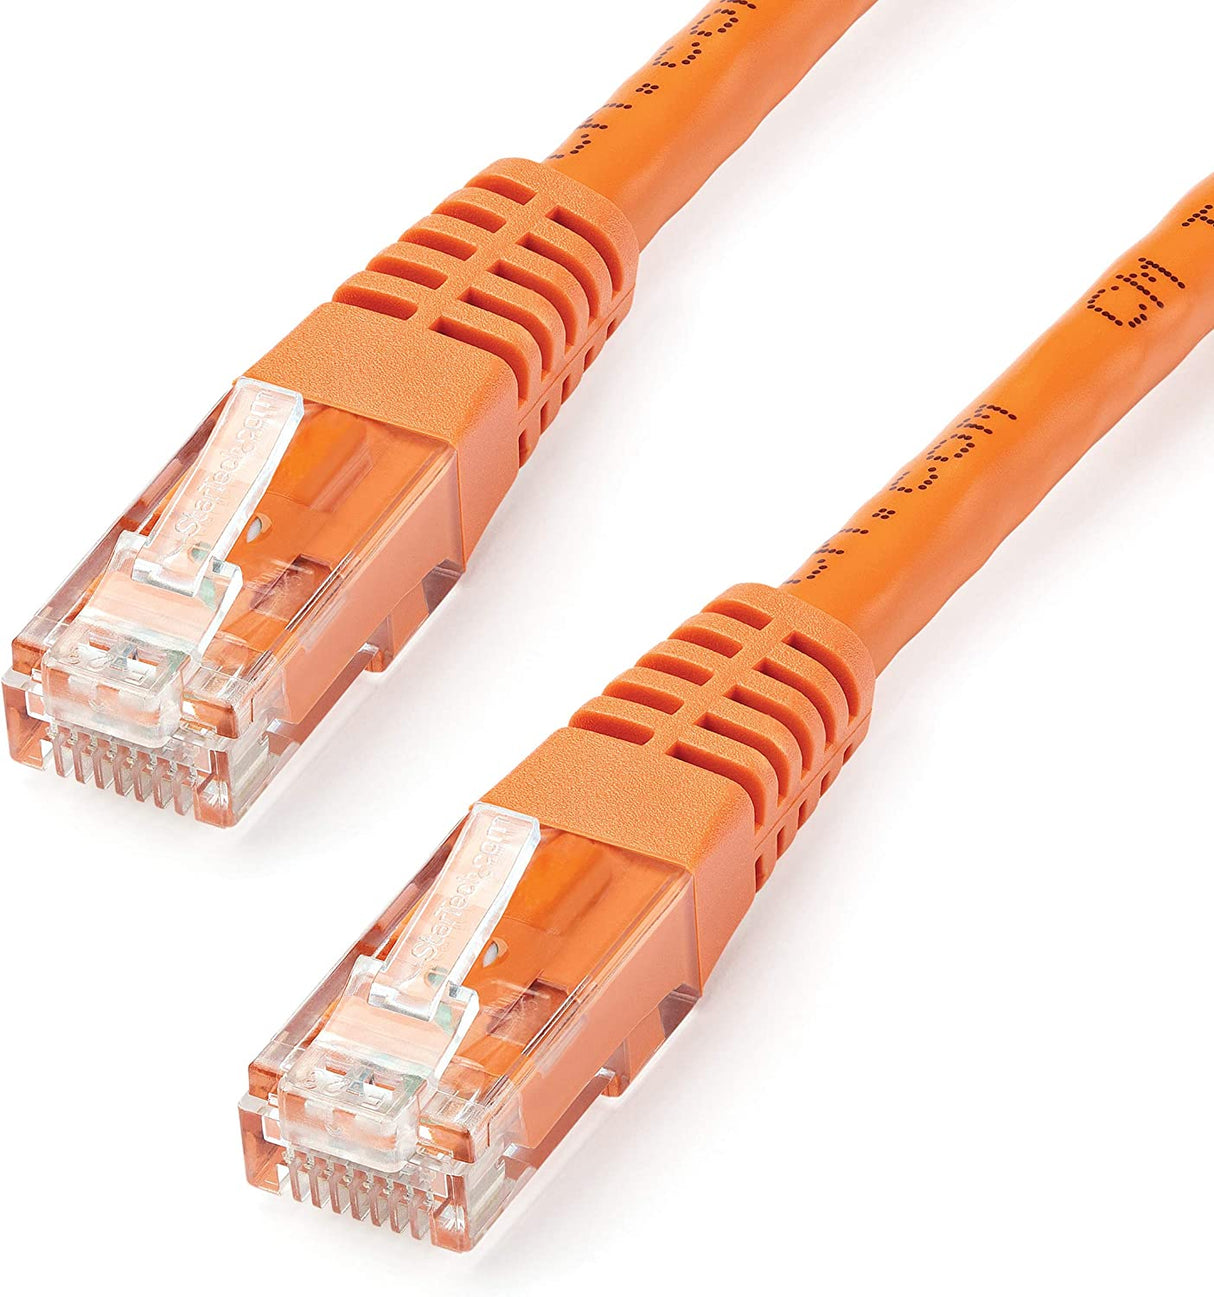 StarTech.com 15ft CAT6 Ethernet Cable - Orange CAT 6 Gigabit Ethernet Wire -650MHz 100W PoE++ RJ45 UTP Molded Category 6 Network/Patch Cord w/Strain Relief/Fluke Tested UL/TIA Certified (C6PATCH15OR) Orange 15 ft / 4.5 m 1 Pack